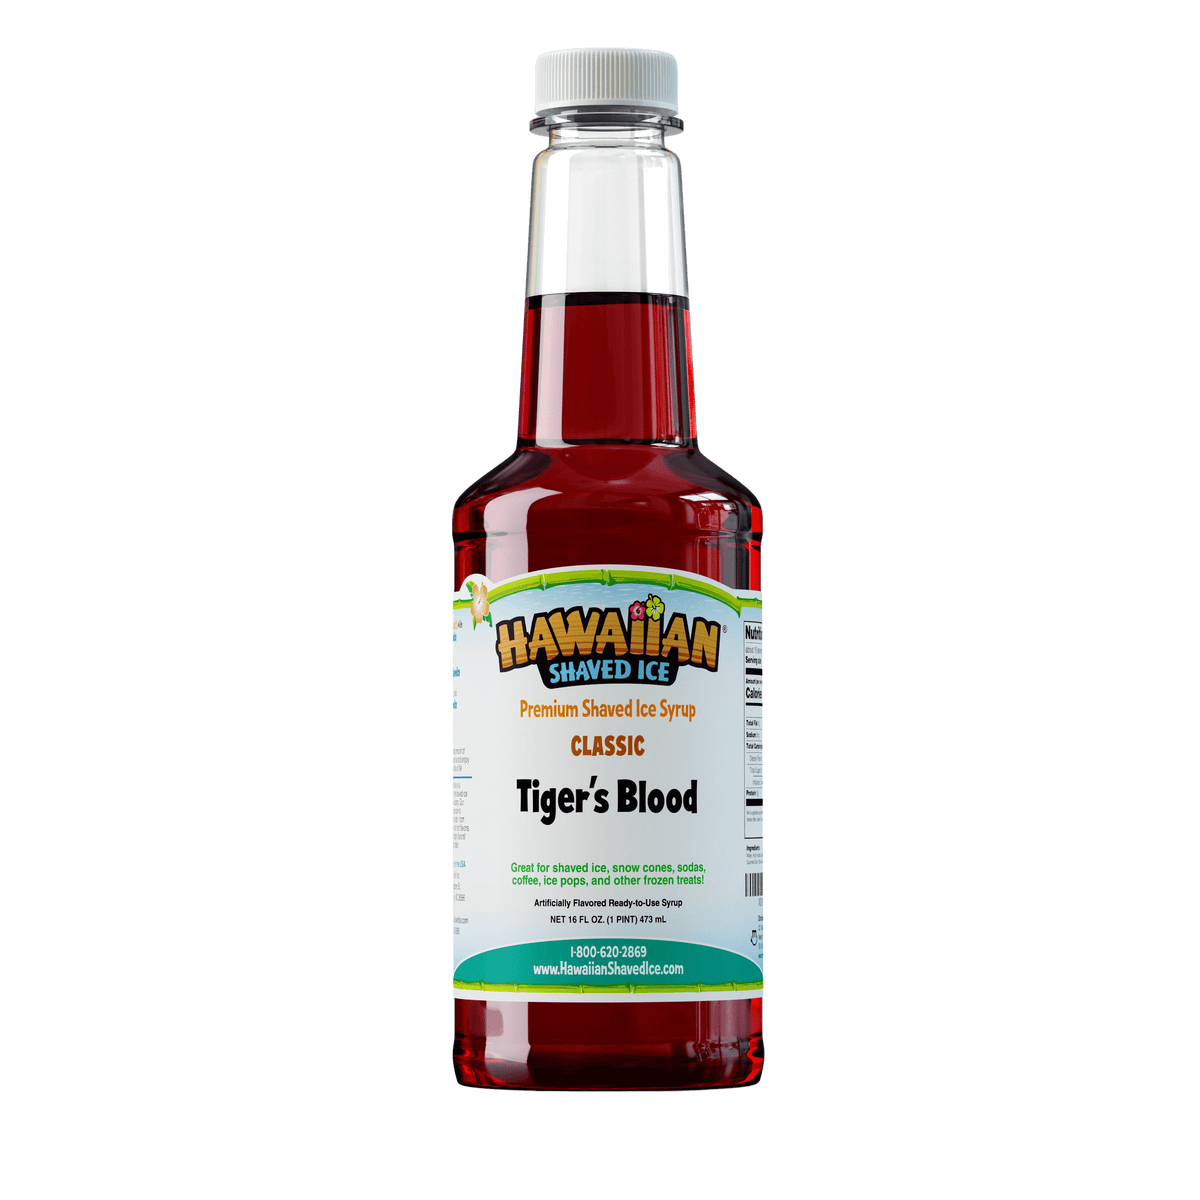 A pint (16-oz) of Hawaiian Shaved Ice Tiger’s Blood Flavored syrup, Red